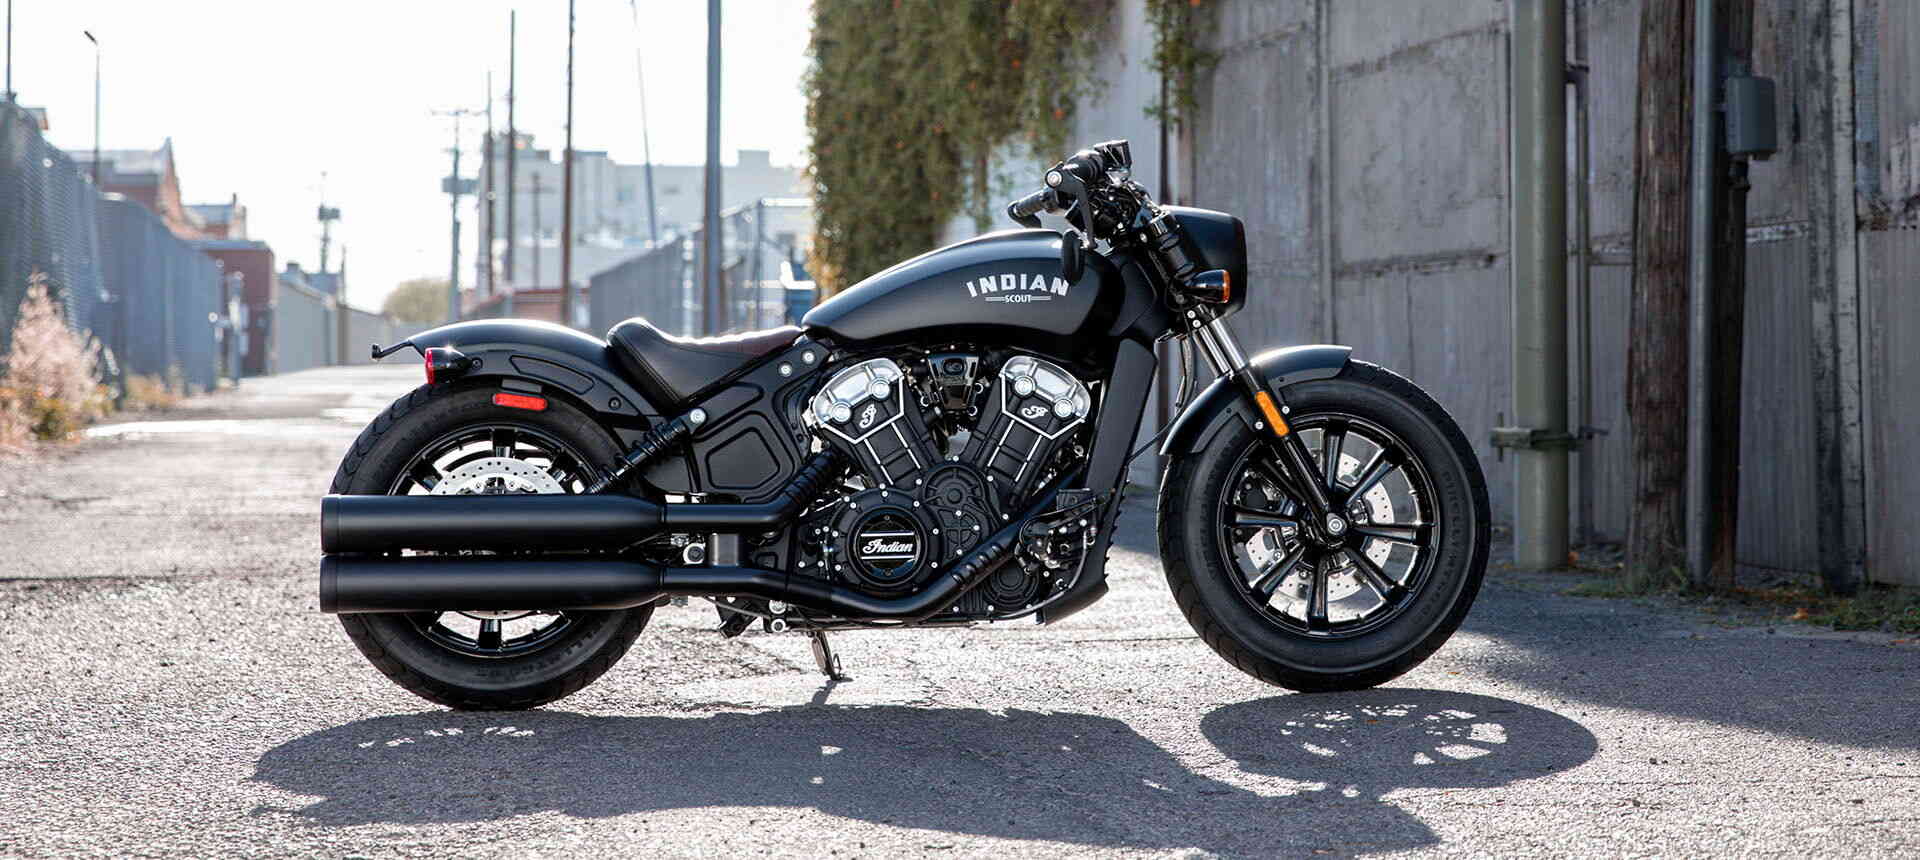 2020 Indian Scout Bobber [Specs & Info] wBW